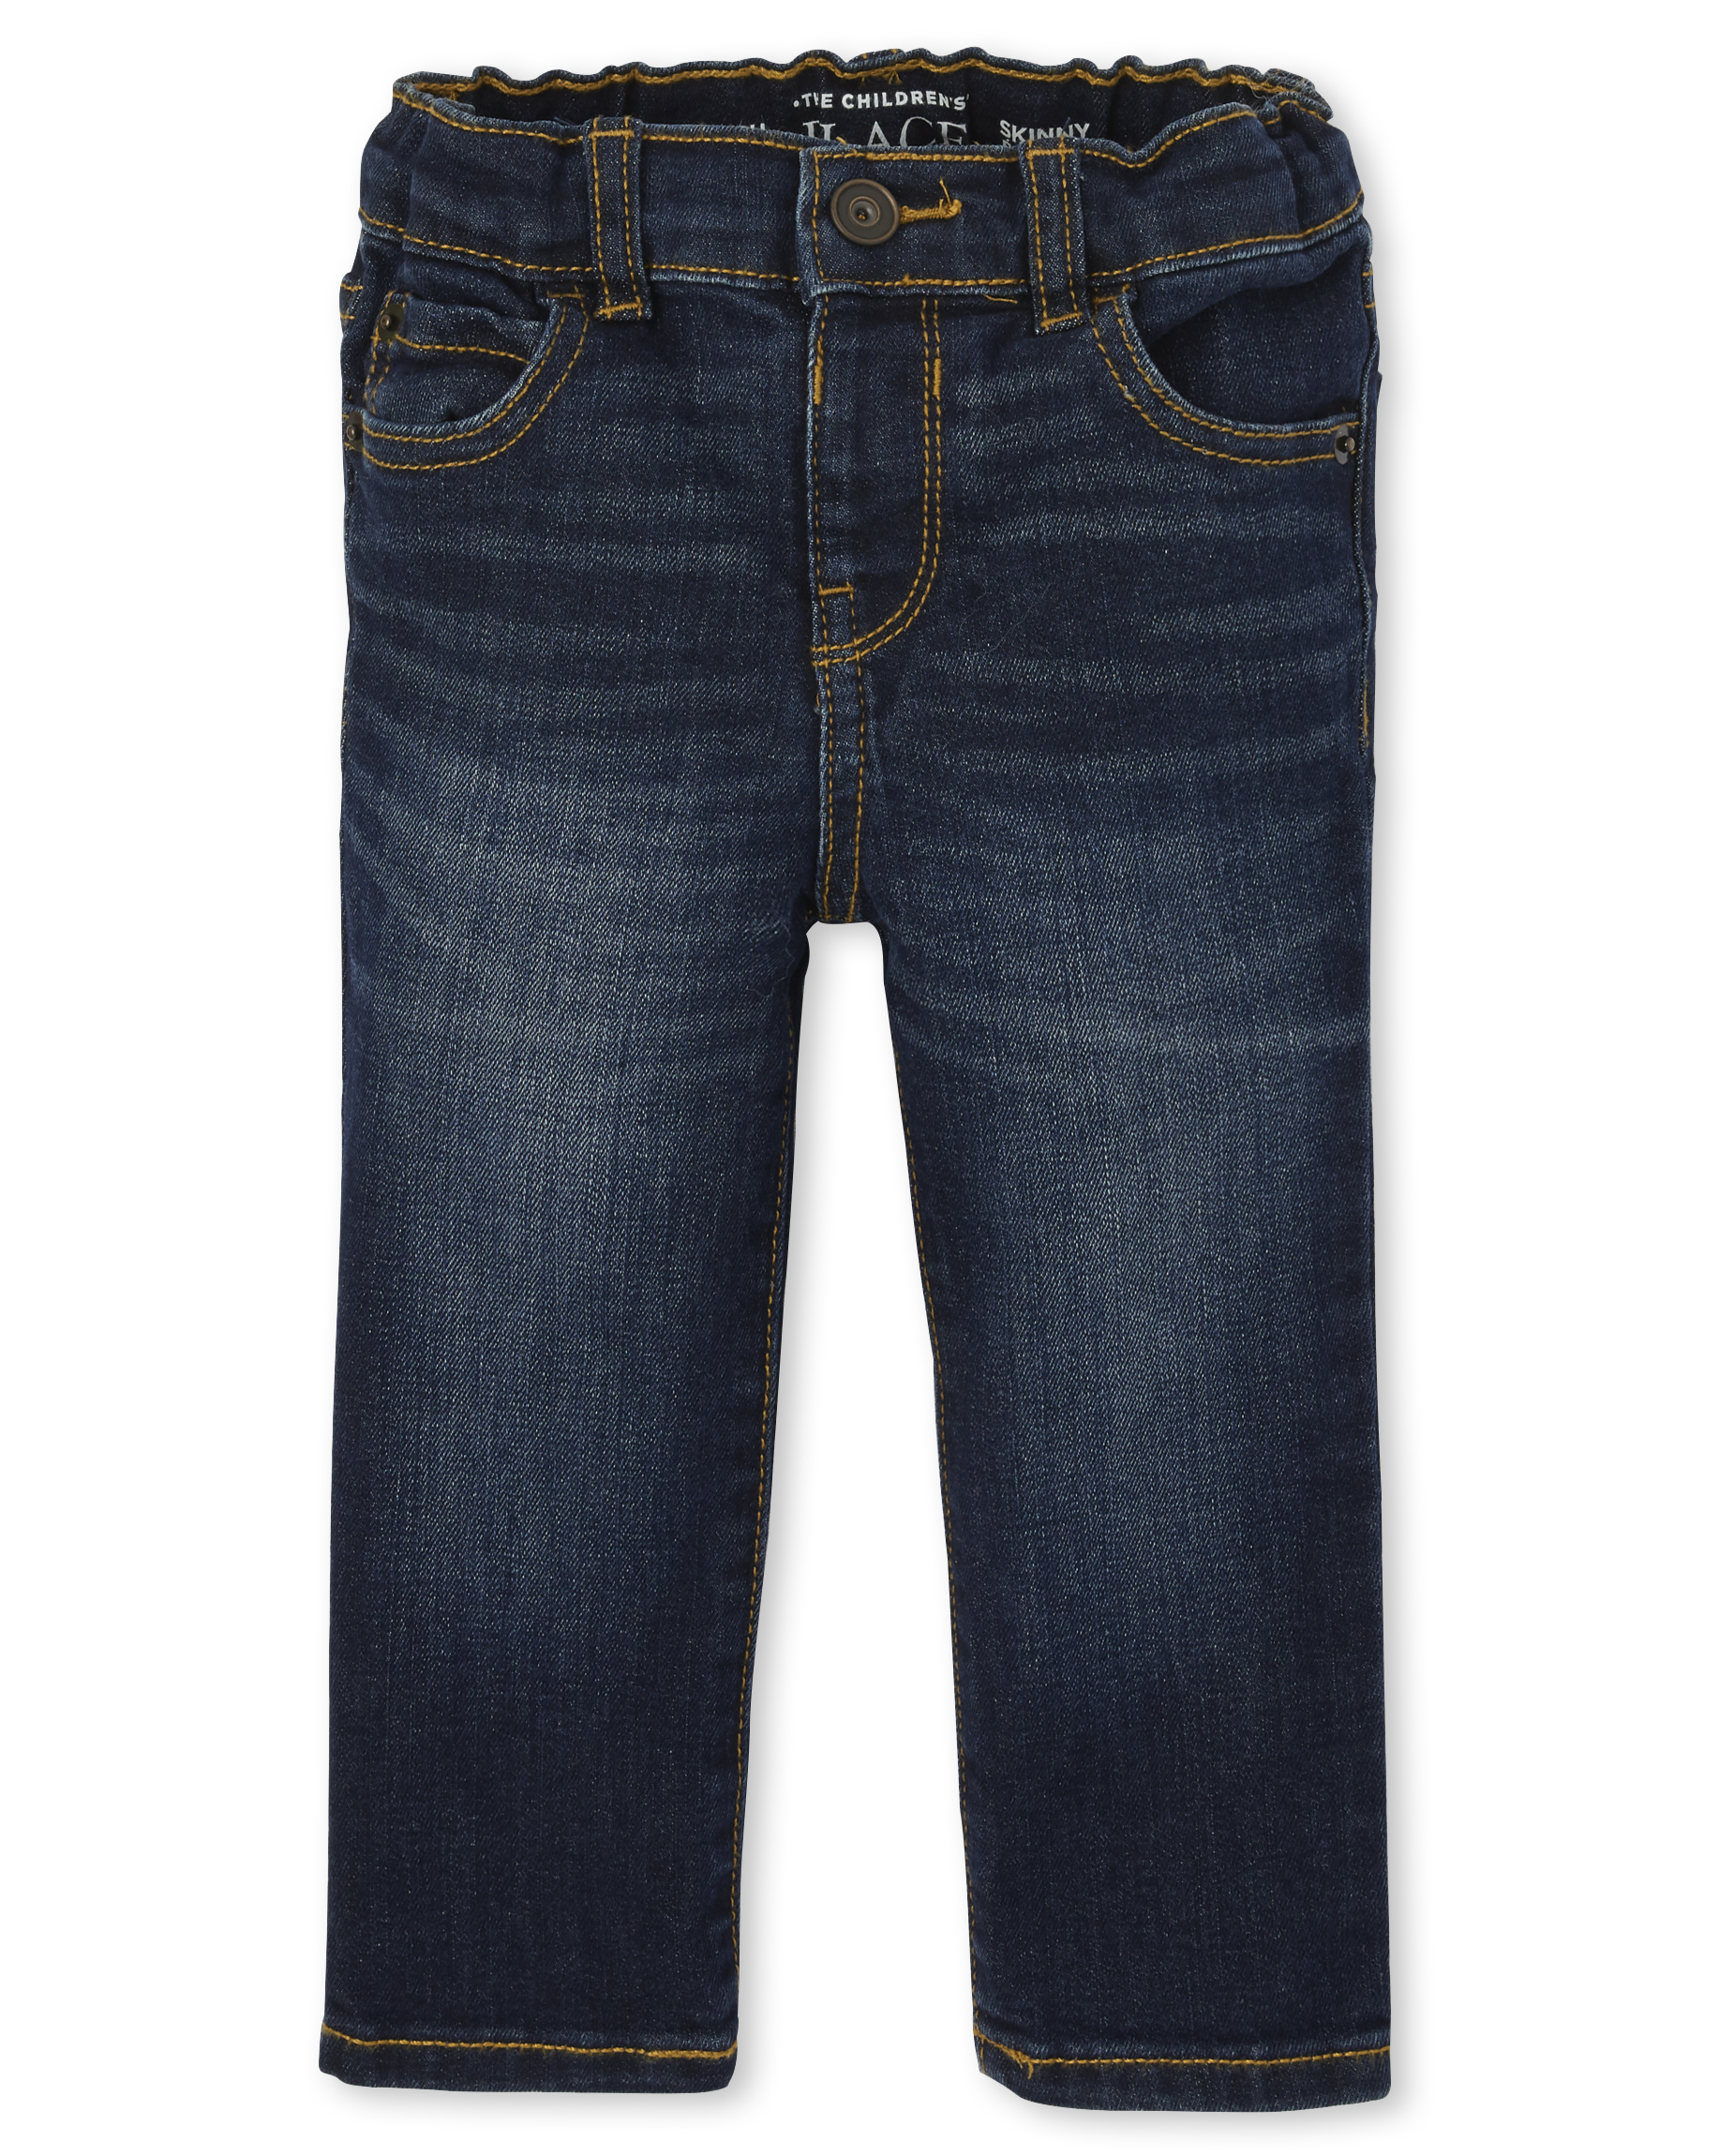 Toddler Boy Skinny Jeans: Blue & Grey | The Children's Place